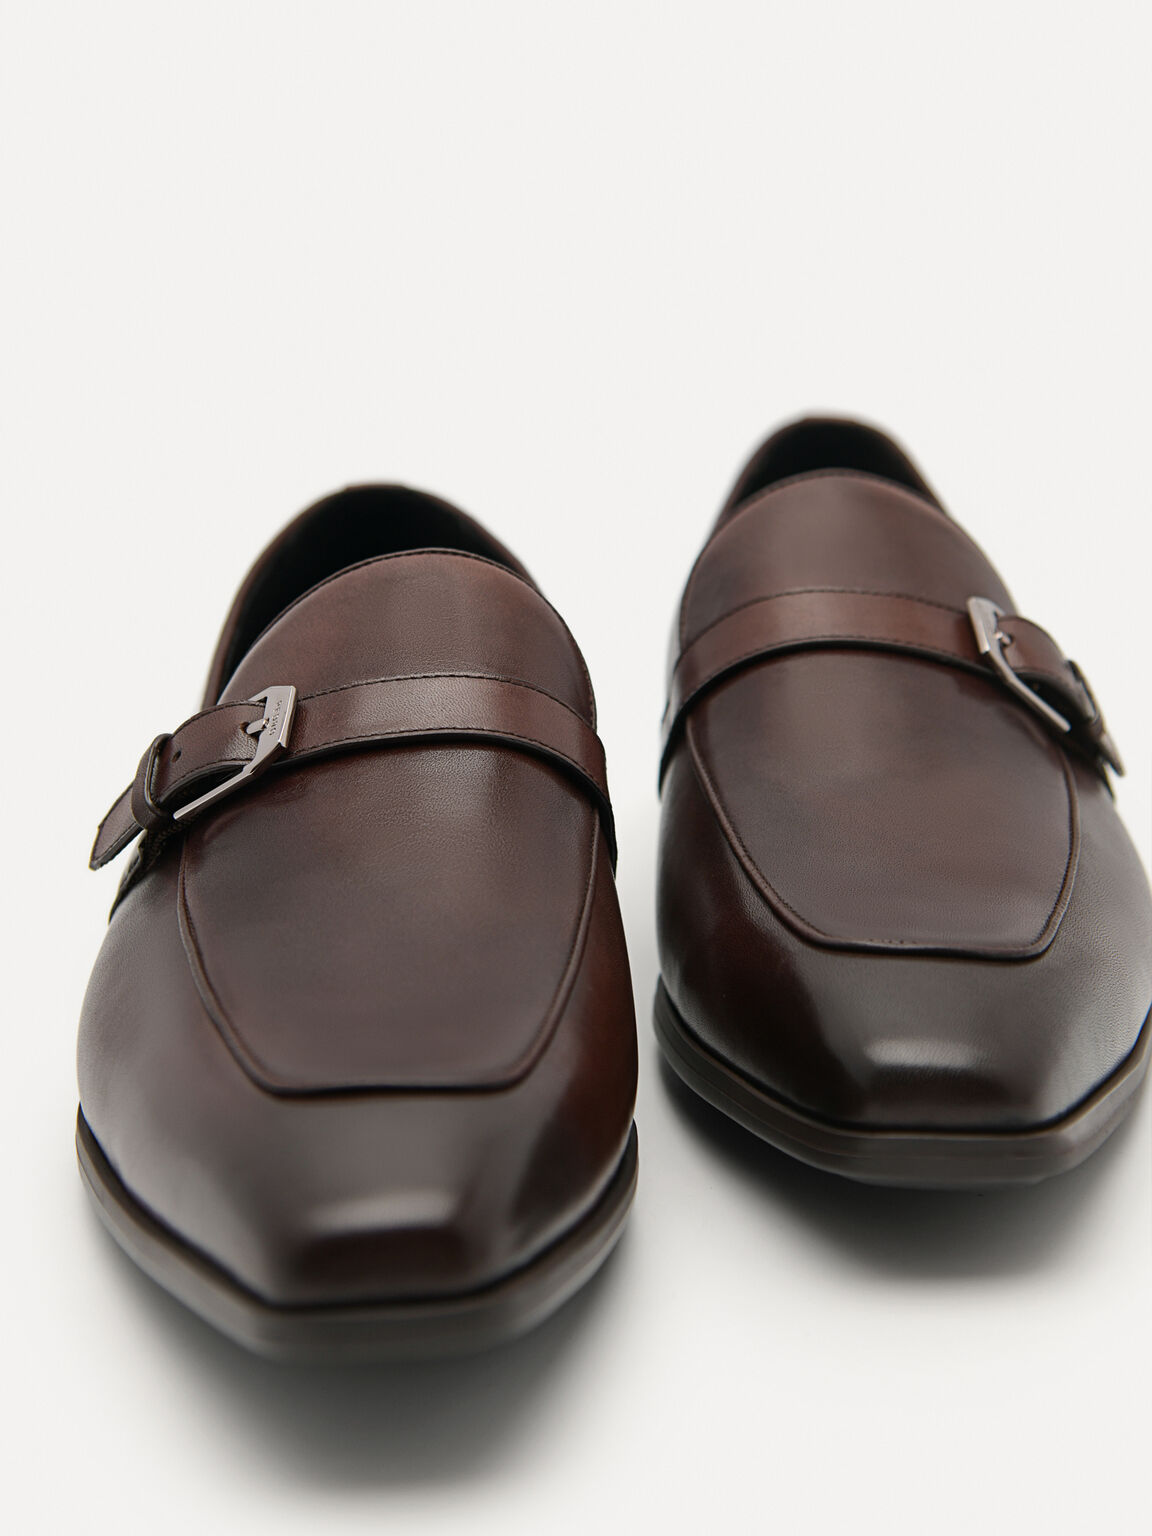 Brando Leather Loafers, Brown